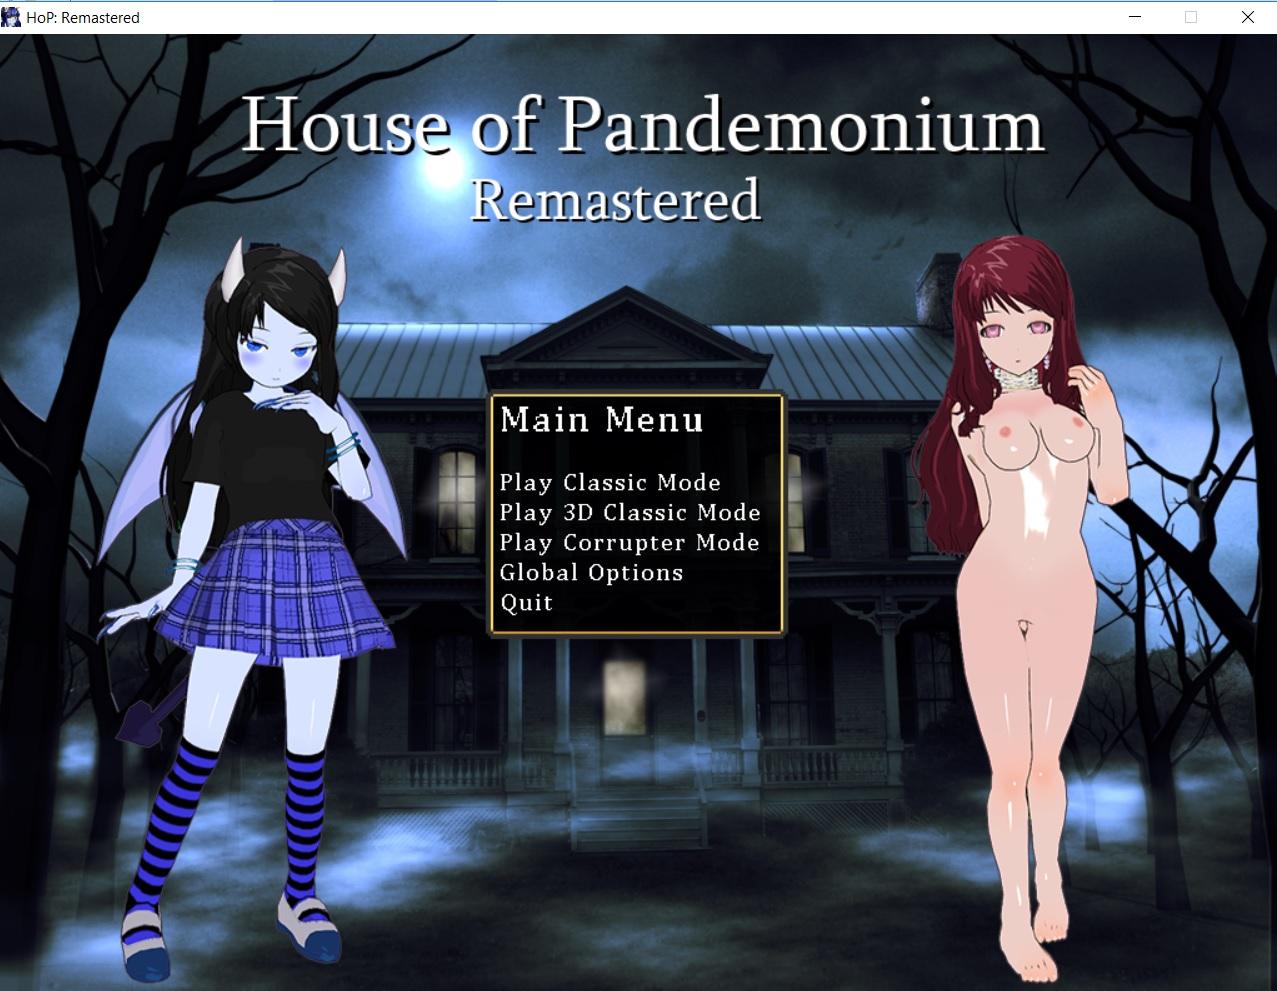 HOUSE OF PANDEMONIUM REMASTERED BY SALTYJUSTICE VER 2.0.0A